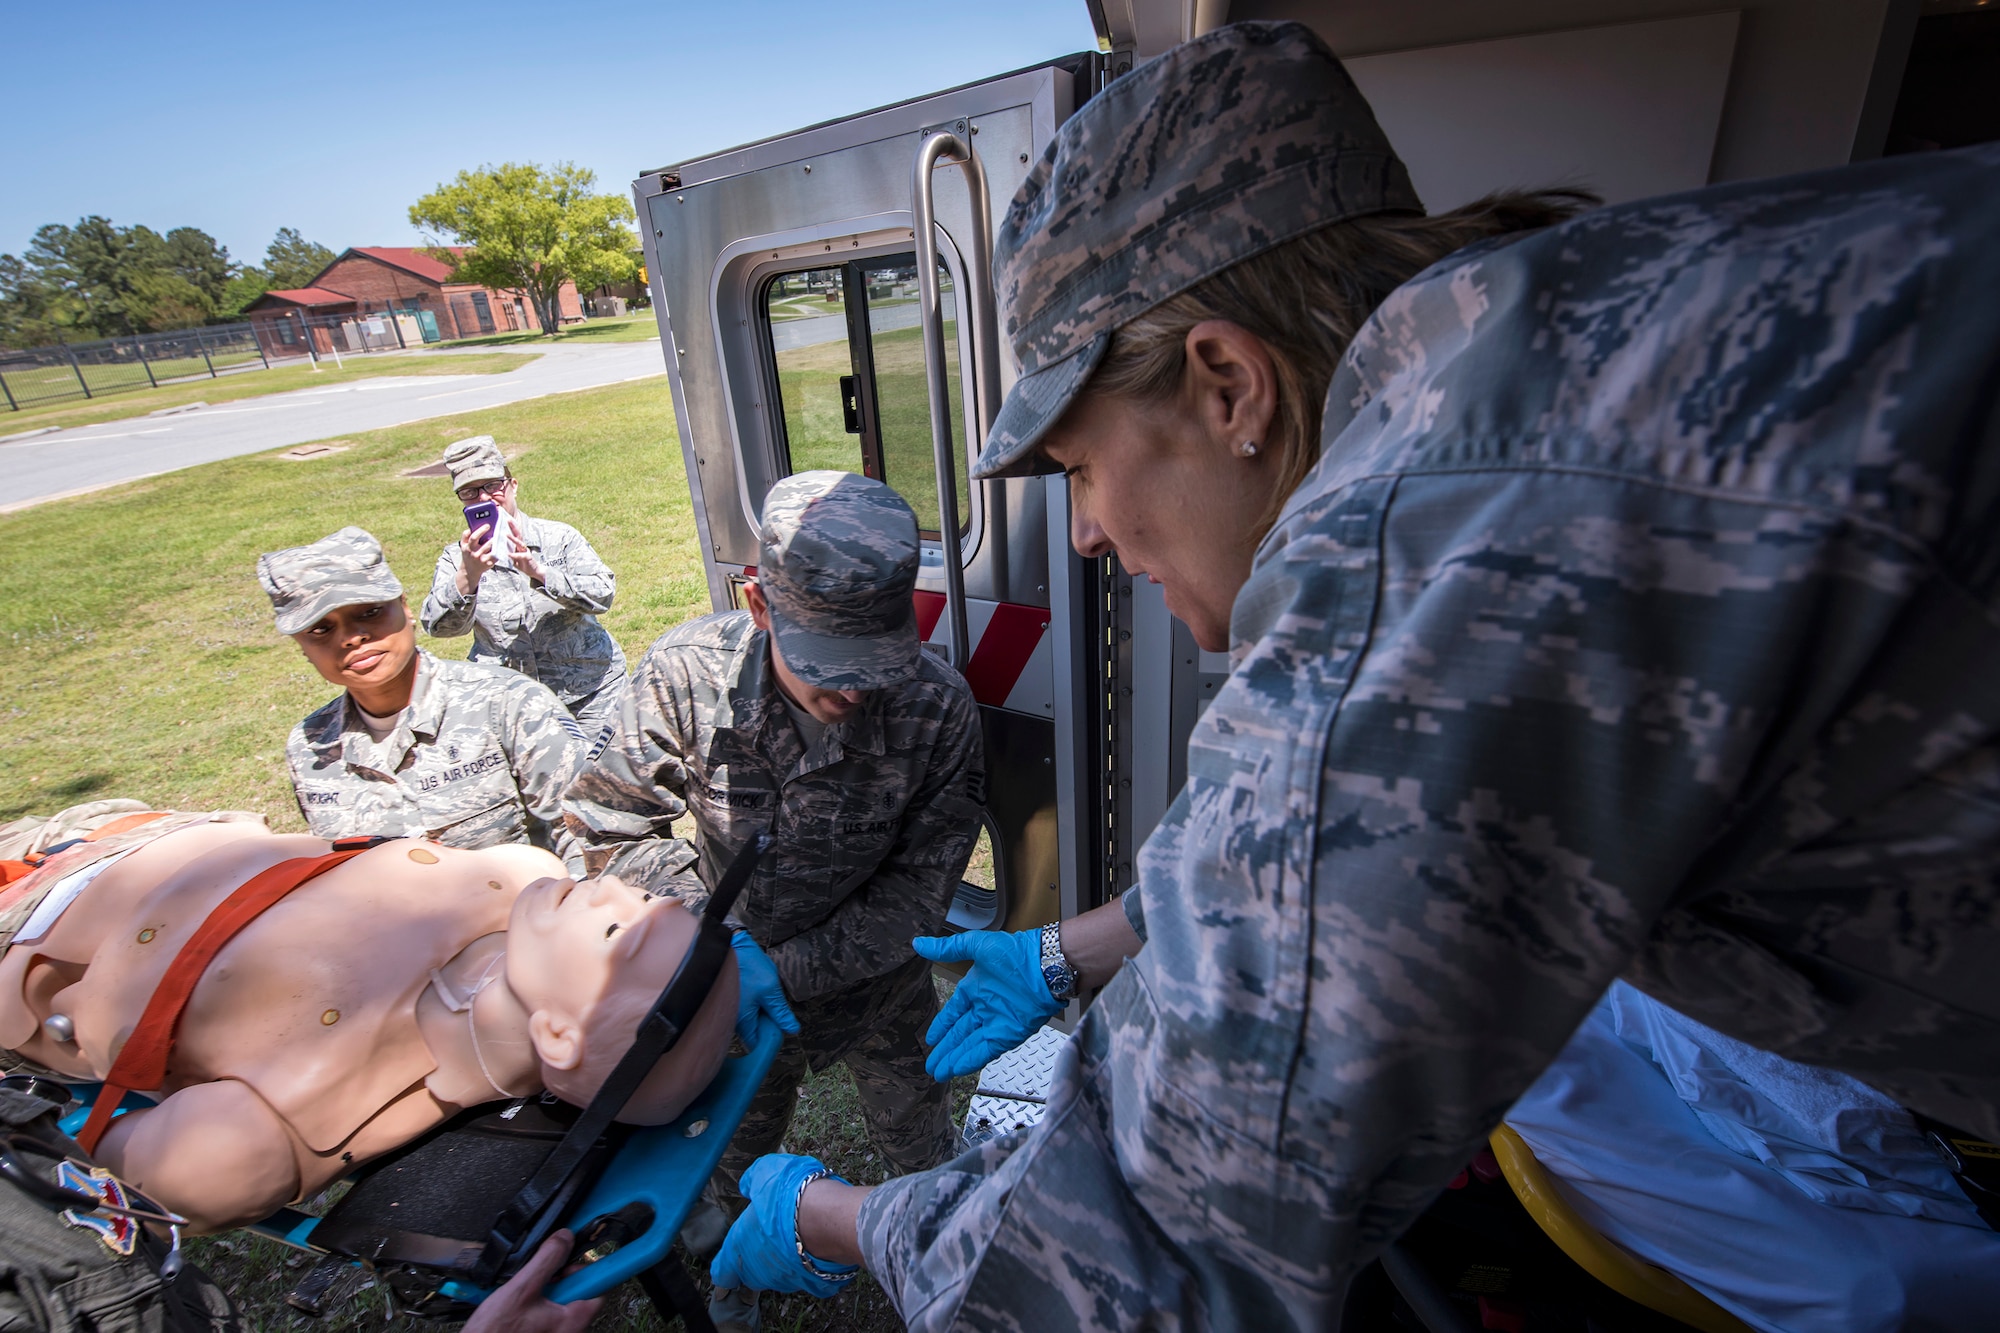 Col. Jennifer Short, right, 23d Wing commander, prepares to receive a gurney holding a mannequin, April 30, 2018, at Moody Air Force Base, Ga. Short toured the 23d Medical Group (MDG) to gain a better understanding of their overall mission, capabilities, and comprehensive duties, and was able to experience the day-to-day operations of the various units within the 23d MDG, ranging from bioenvironmental to ambulatory care. (U.S. Air Force photo by Airman 1st Class Eugene Oliver)